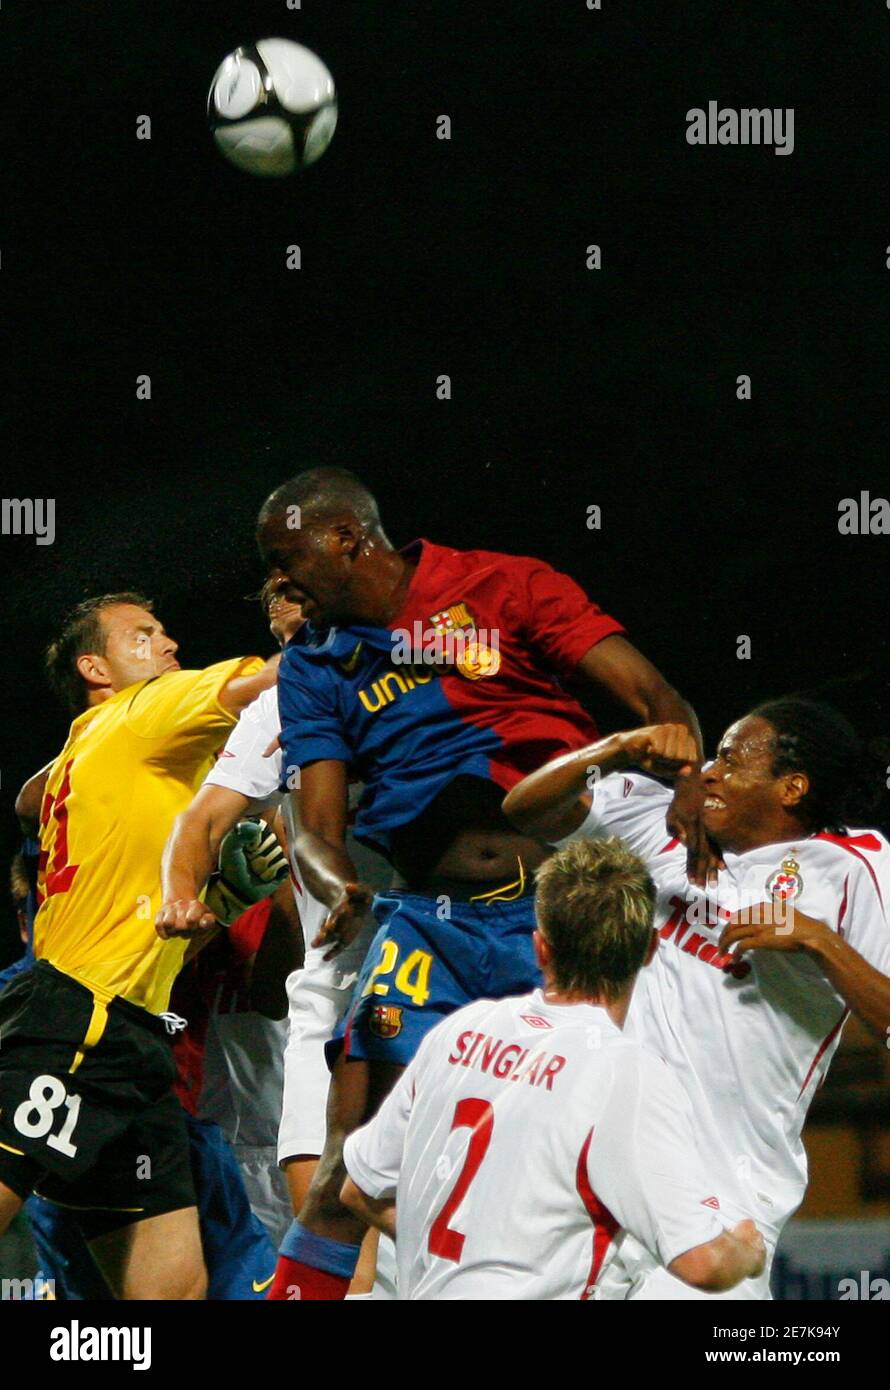 Wisla Krakow's Mariusz Pawelek (L) and Junior Diaz (R) fight for the ball  with Barcelona's Yaya Toure (C) during their Champions League third  qualifying round, second leg soccer match in Krakow August